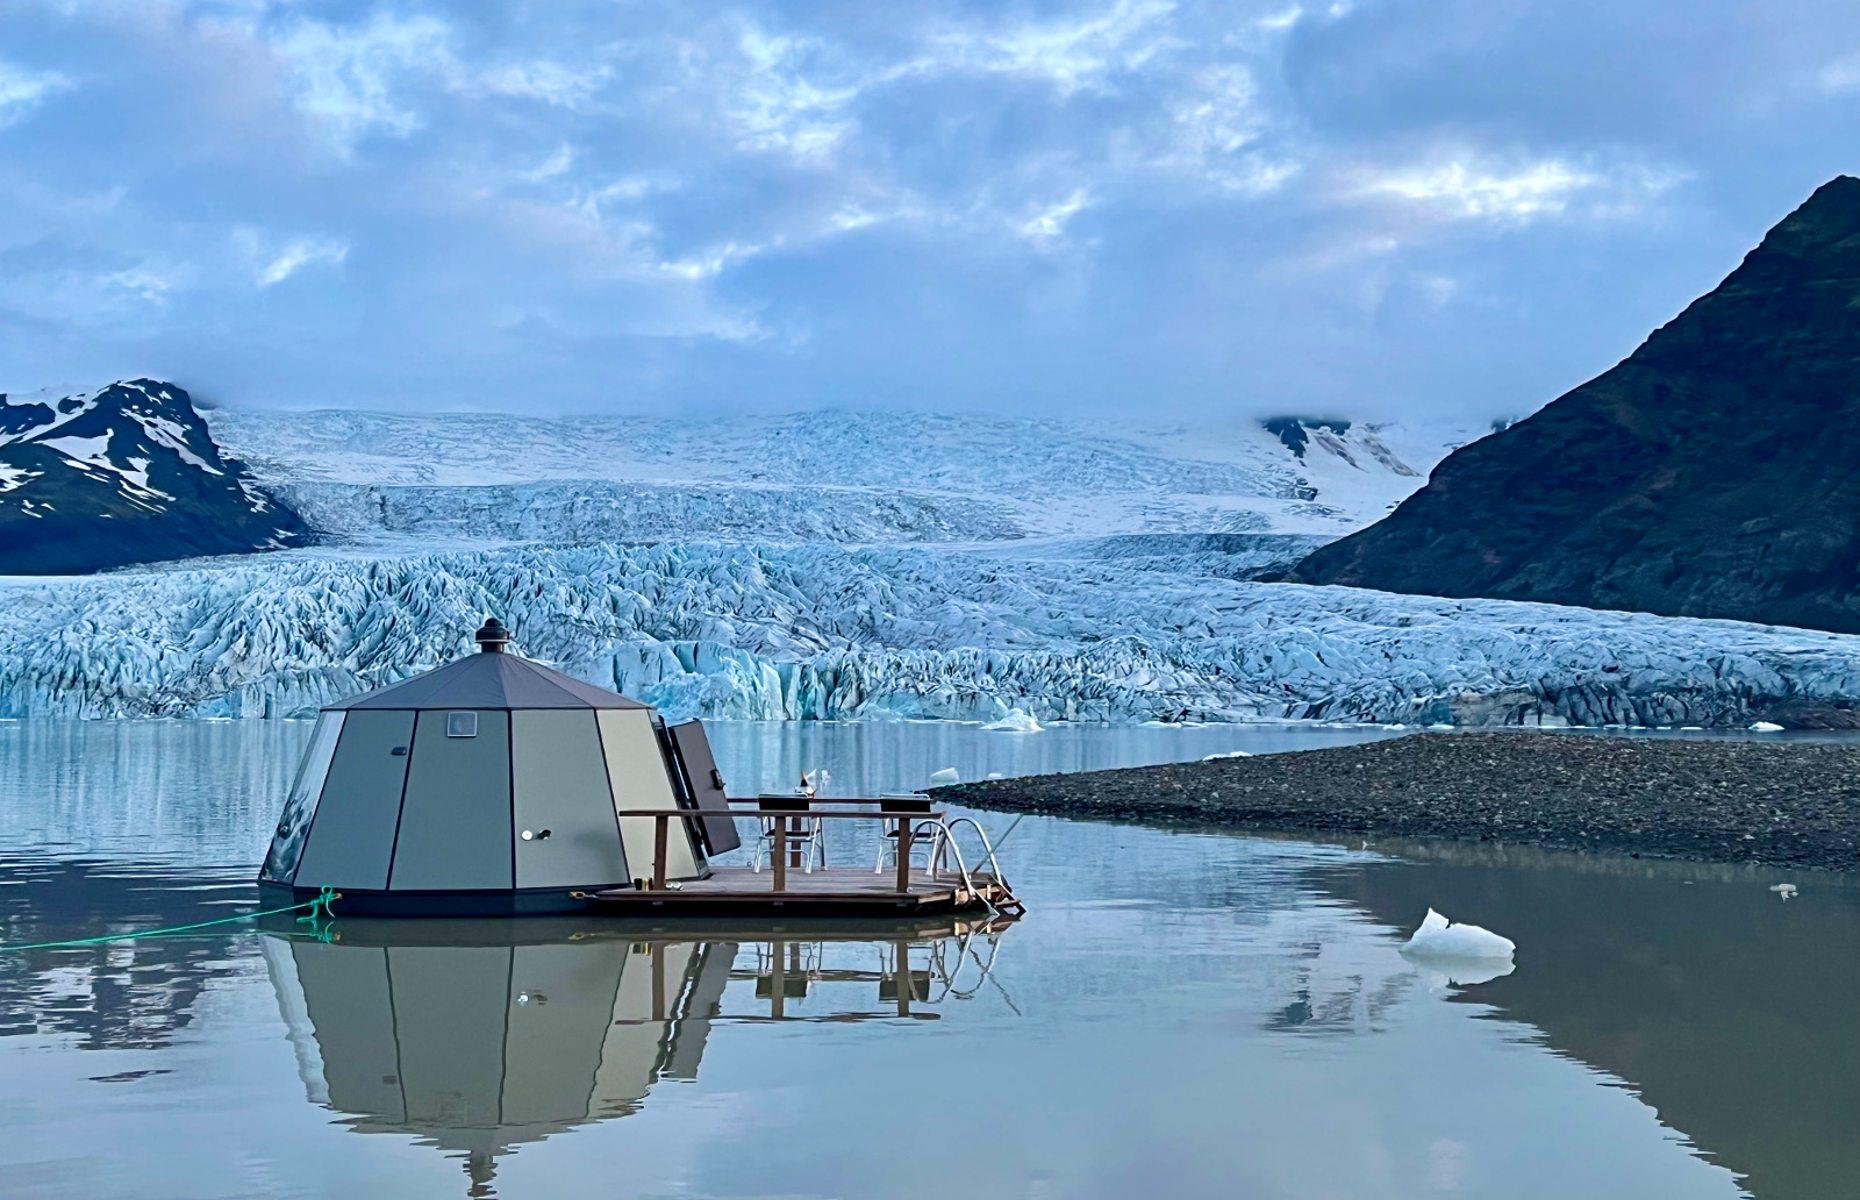 As part of an exclusive new trip offered by Off The Map Travel, adventurous guests will be able to stay the night in one of these incredible glass-walled Aurora Huts on a hidden part of the Fjallsarlon glacial lagoon in southern Iceland. The two hotel rooms float atop the water's surface in summer, but in wintertime they freeze into the lake and can only be accessed via an all-terrain vehicle.